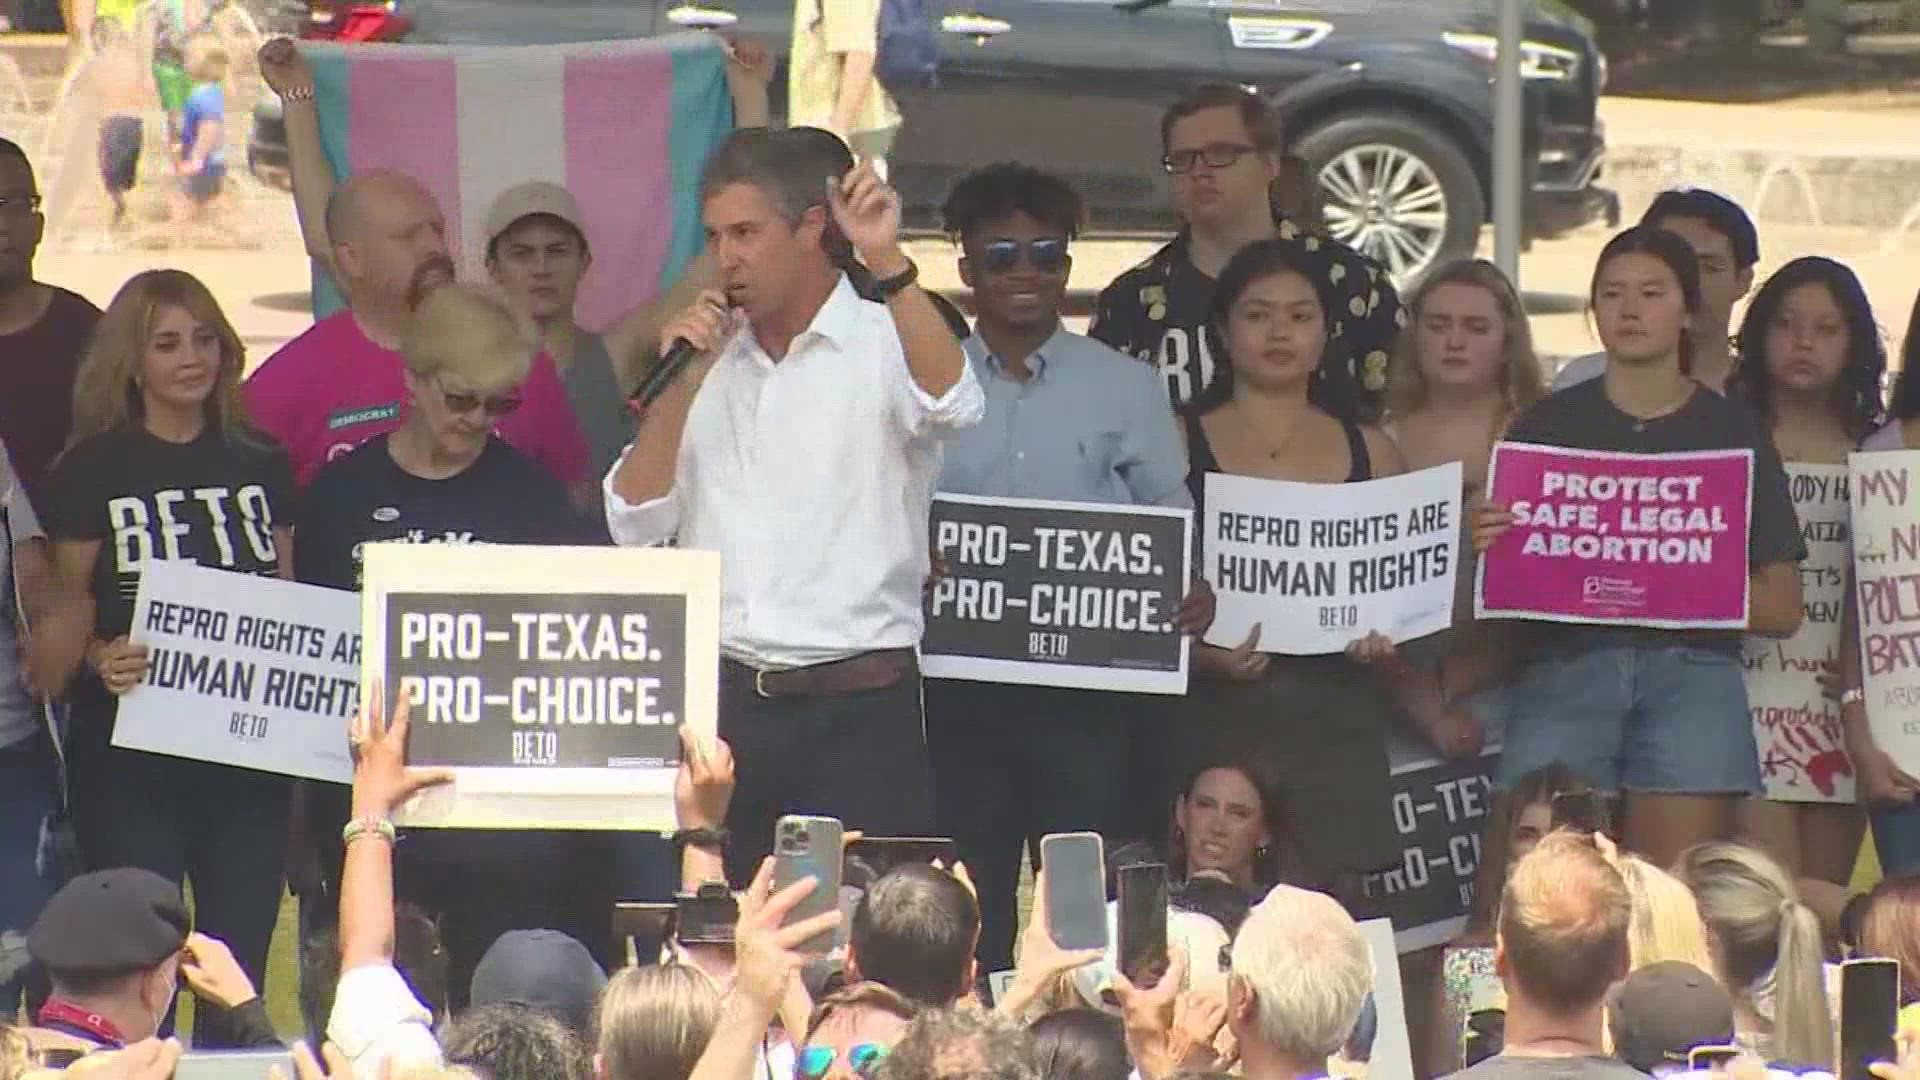 In spite of Saturday's heat, thousands of people packed a park in Downtown Houston for an abortion-rights rally organized by Texas governor candidate Beto O'Rourke.